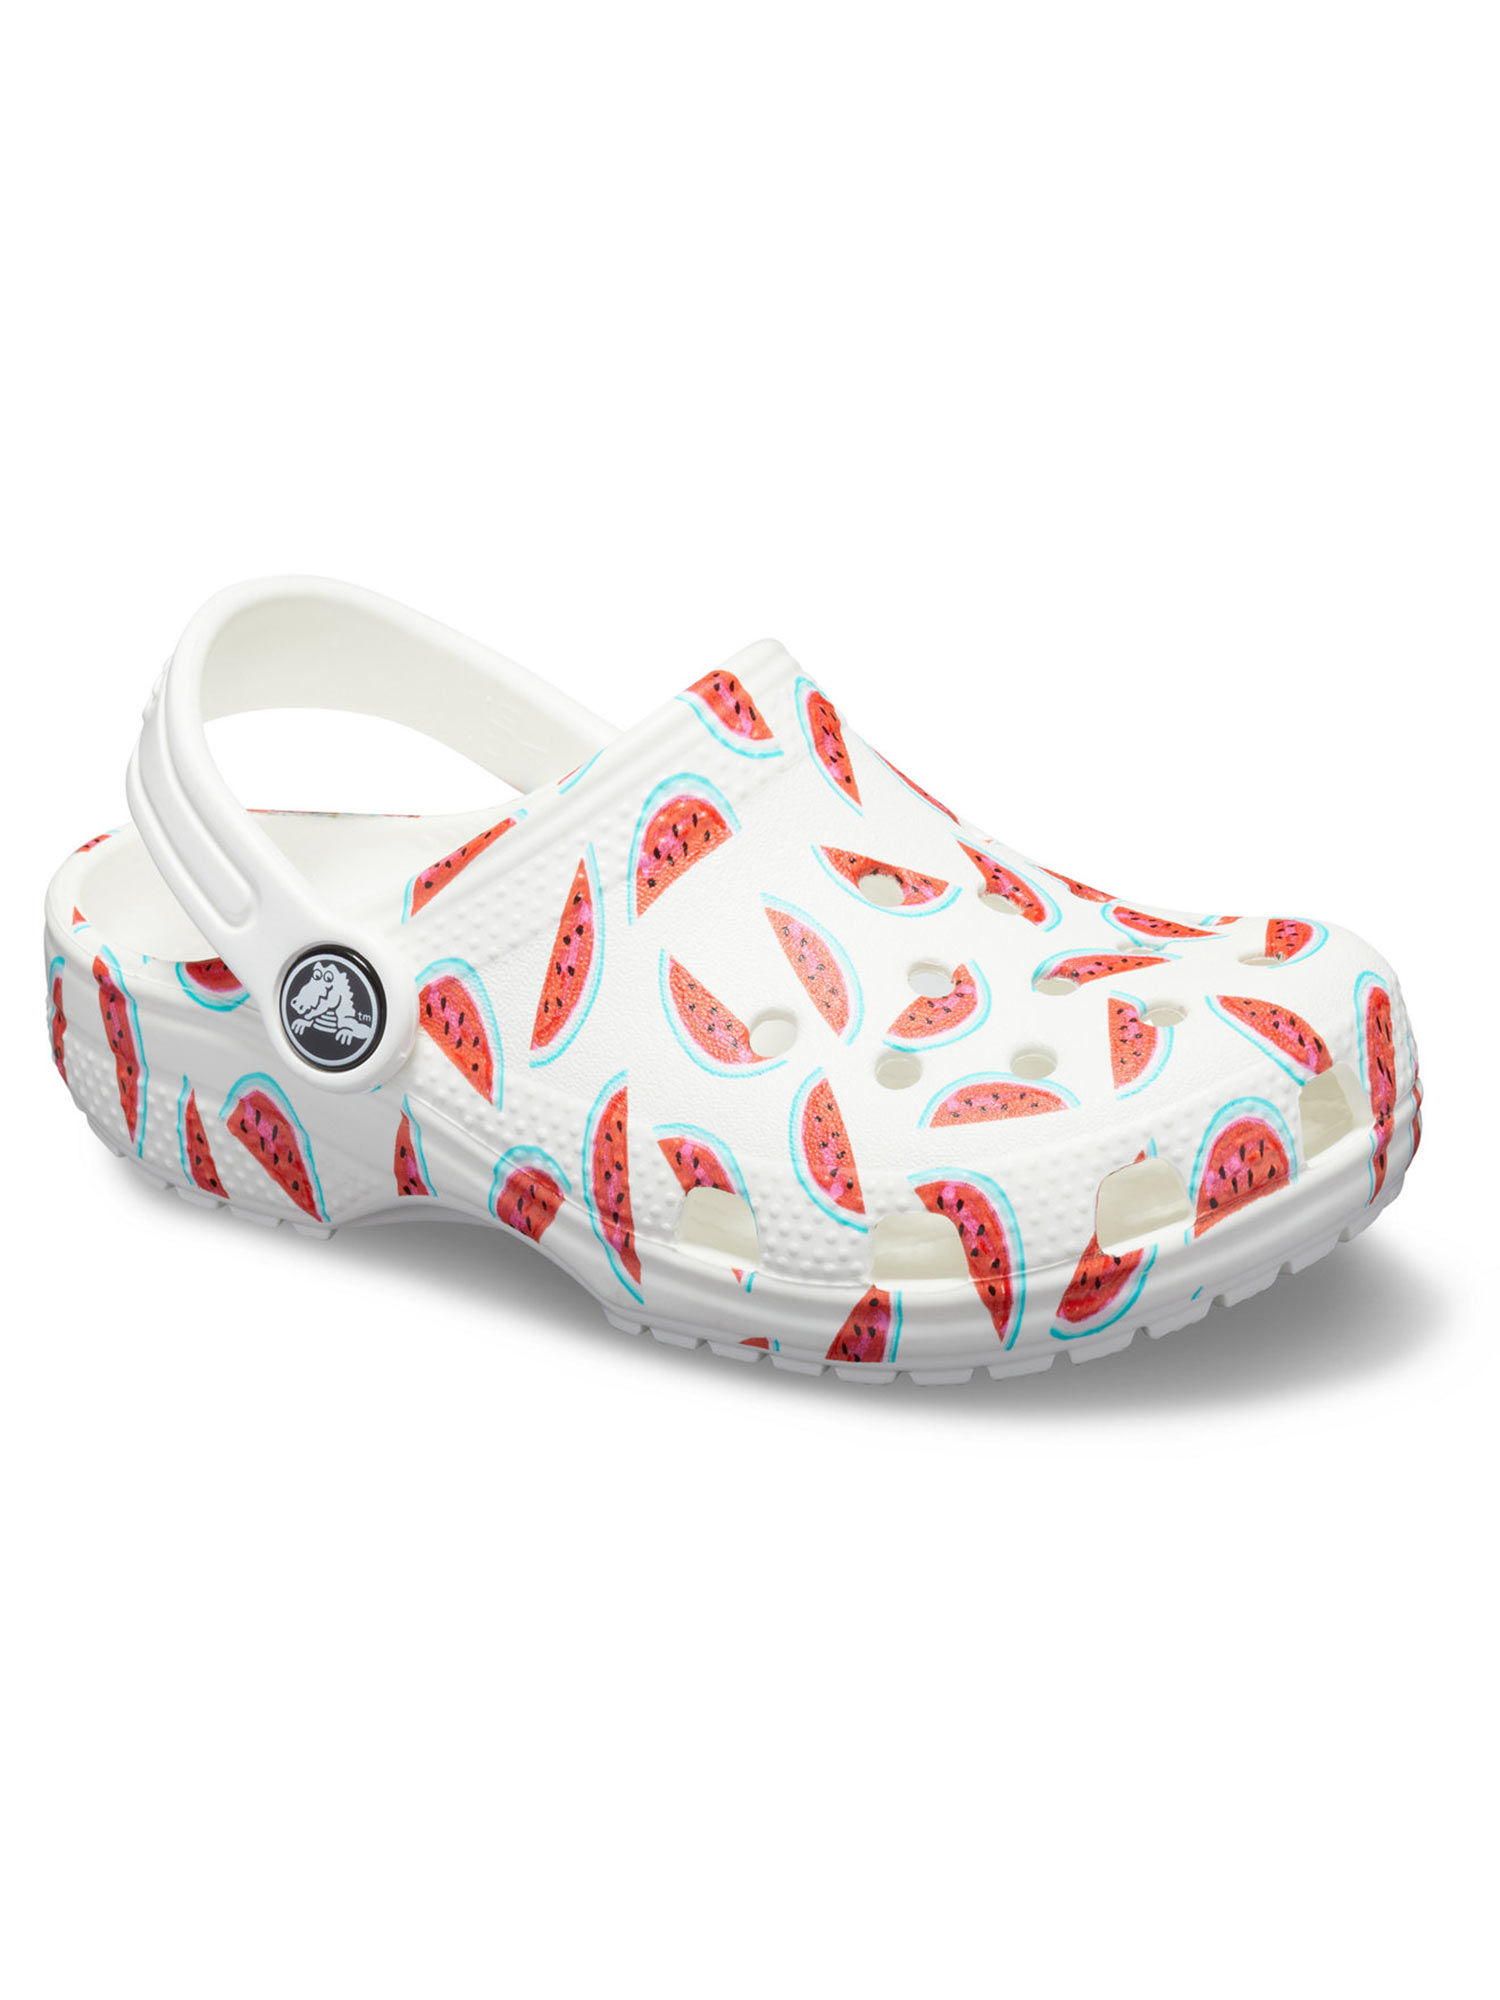 Crocs White Printed Clogs (J3): Buy Crocs White Printed Clogs (J3) Online  at Best Price in India | Nykaa